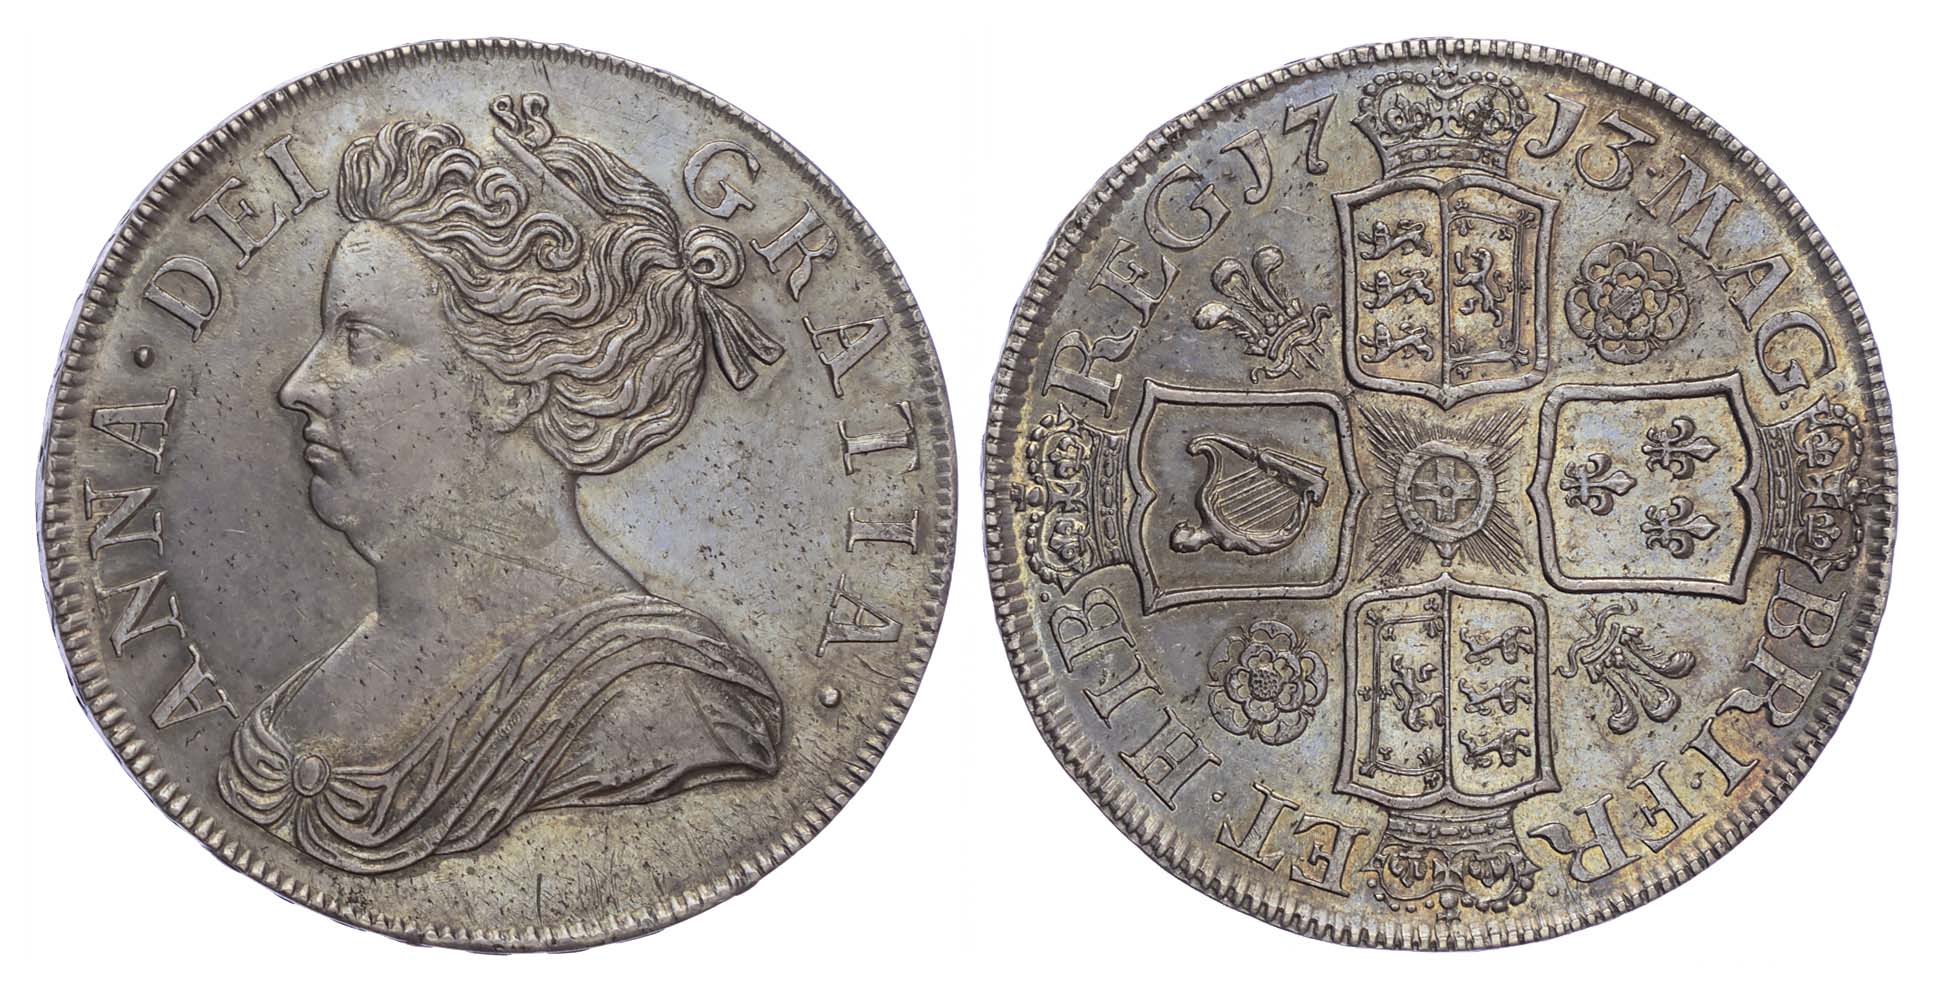 Anne (1702-14), Crown, 1713, Roses & Plumes issue, Dvodecimo edge